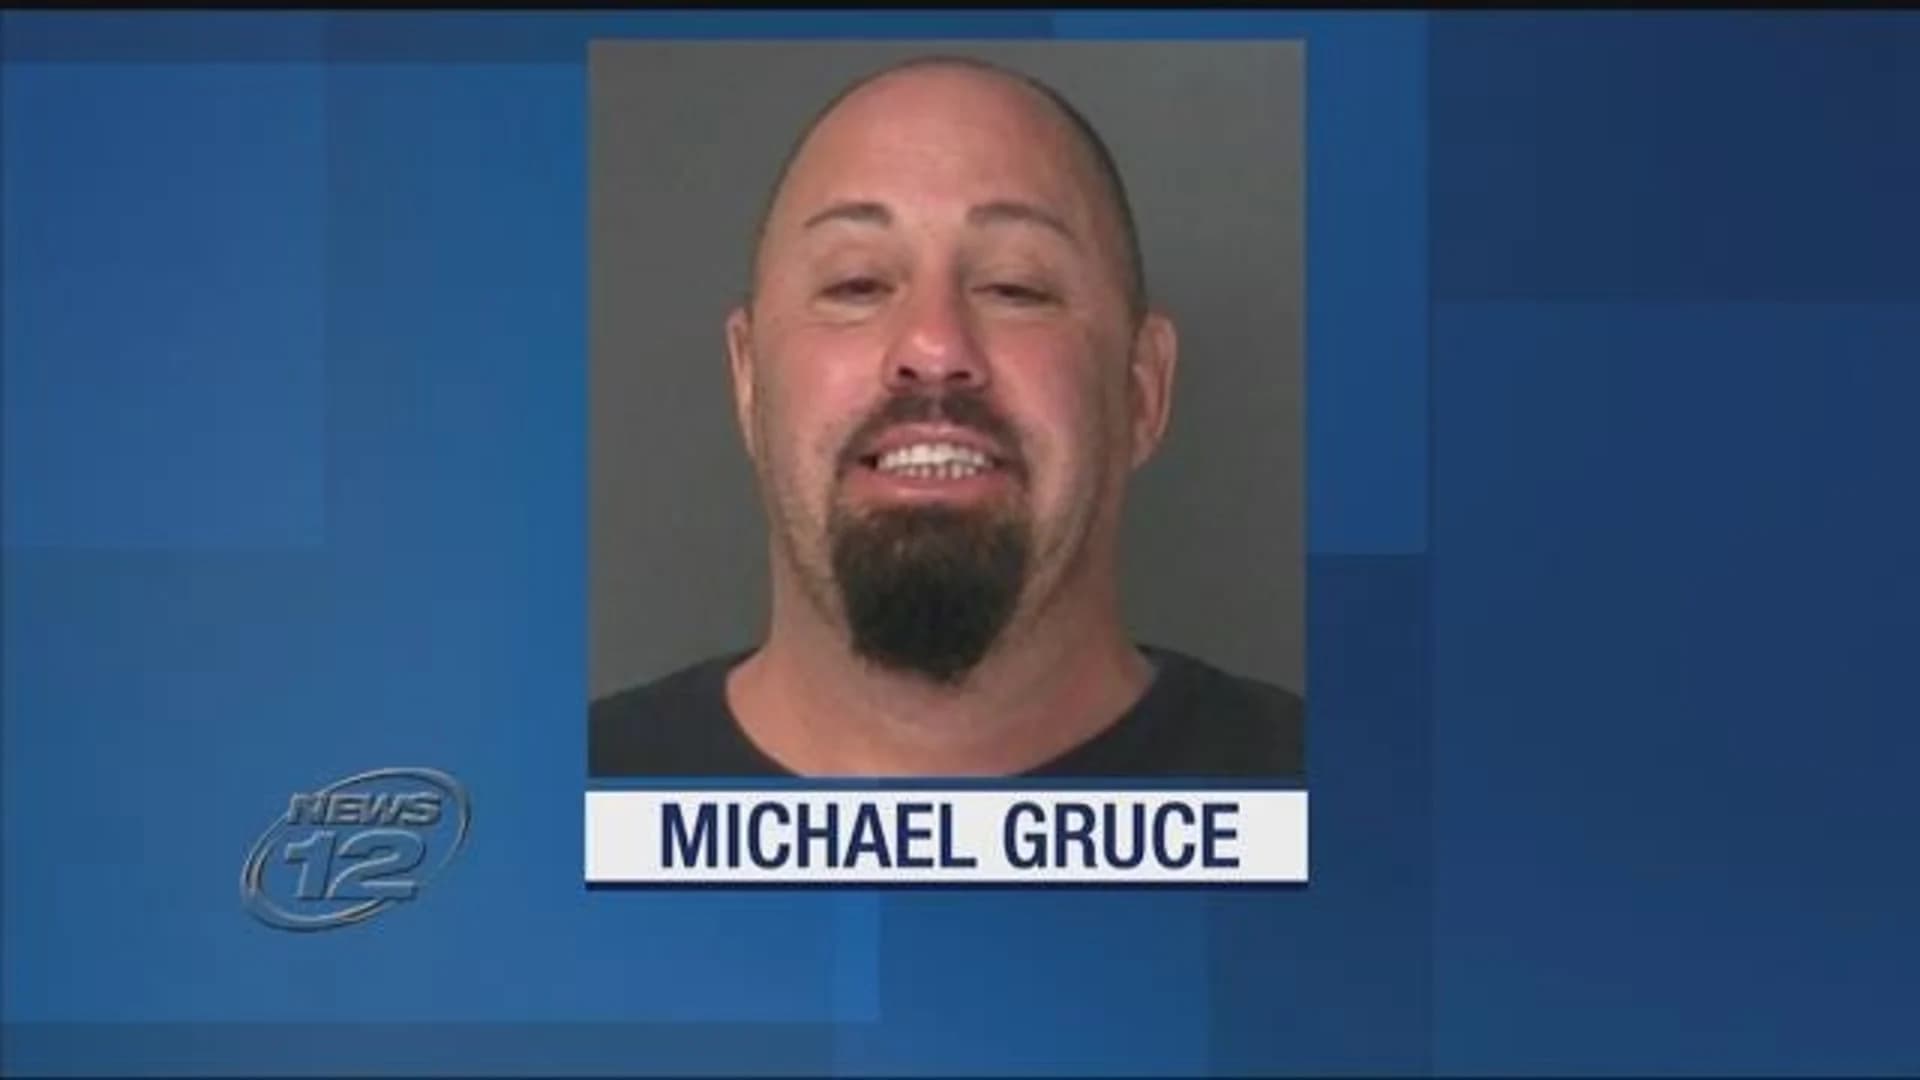 Man charged with striking neighbor with car, fleeing scene